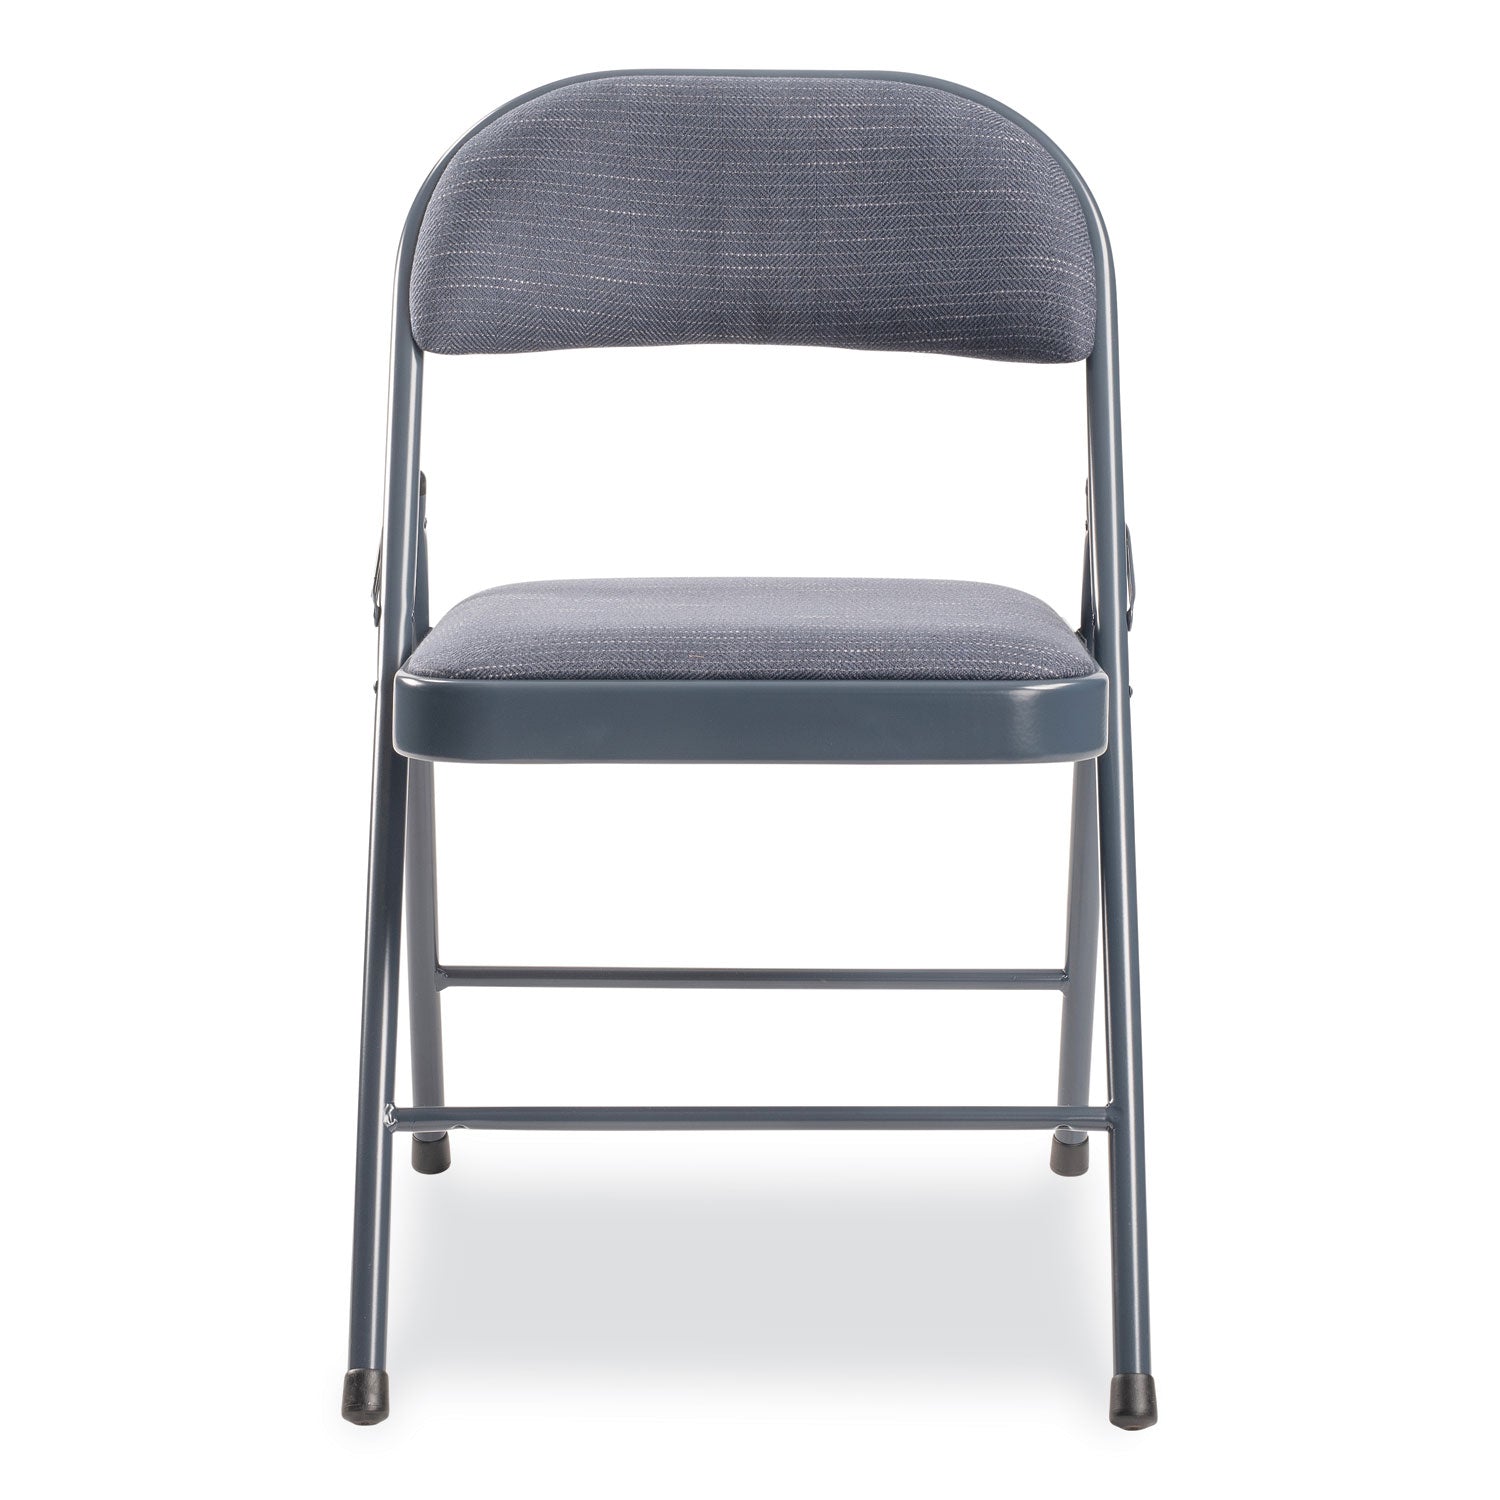 970-series-fabric-padded-steel-folding-chair-supports-250-lb-1775-seat-ht-star-trail-blue-4-ctships-in-1-3-bus-days_nps974 - 4